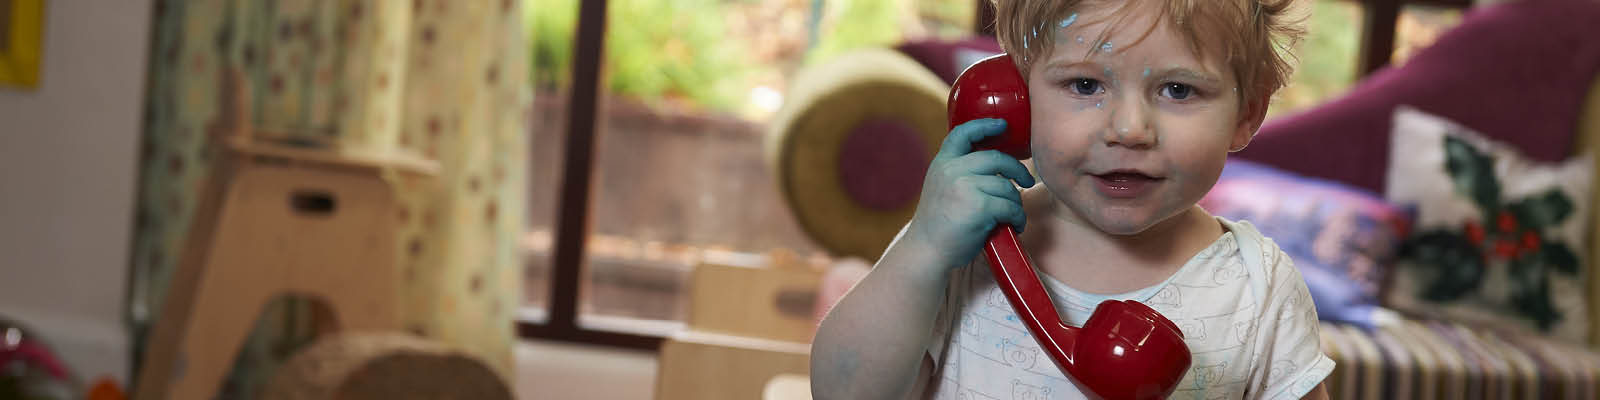 Child talking on a toy phone